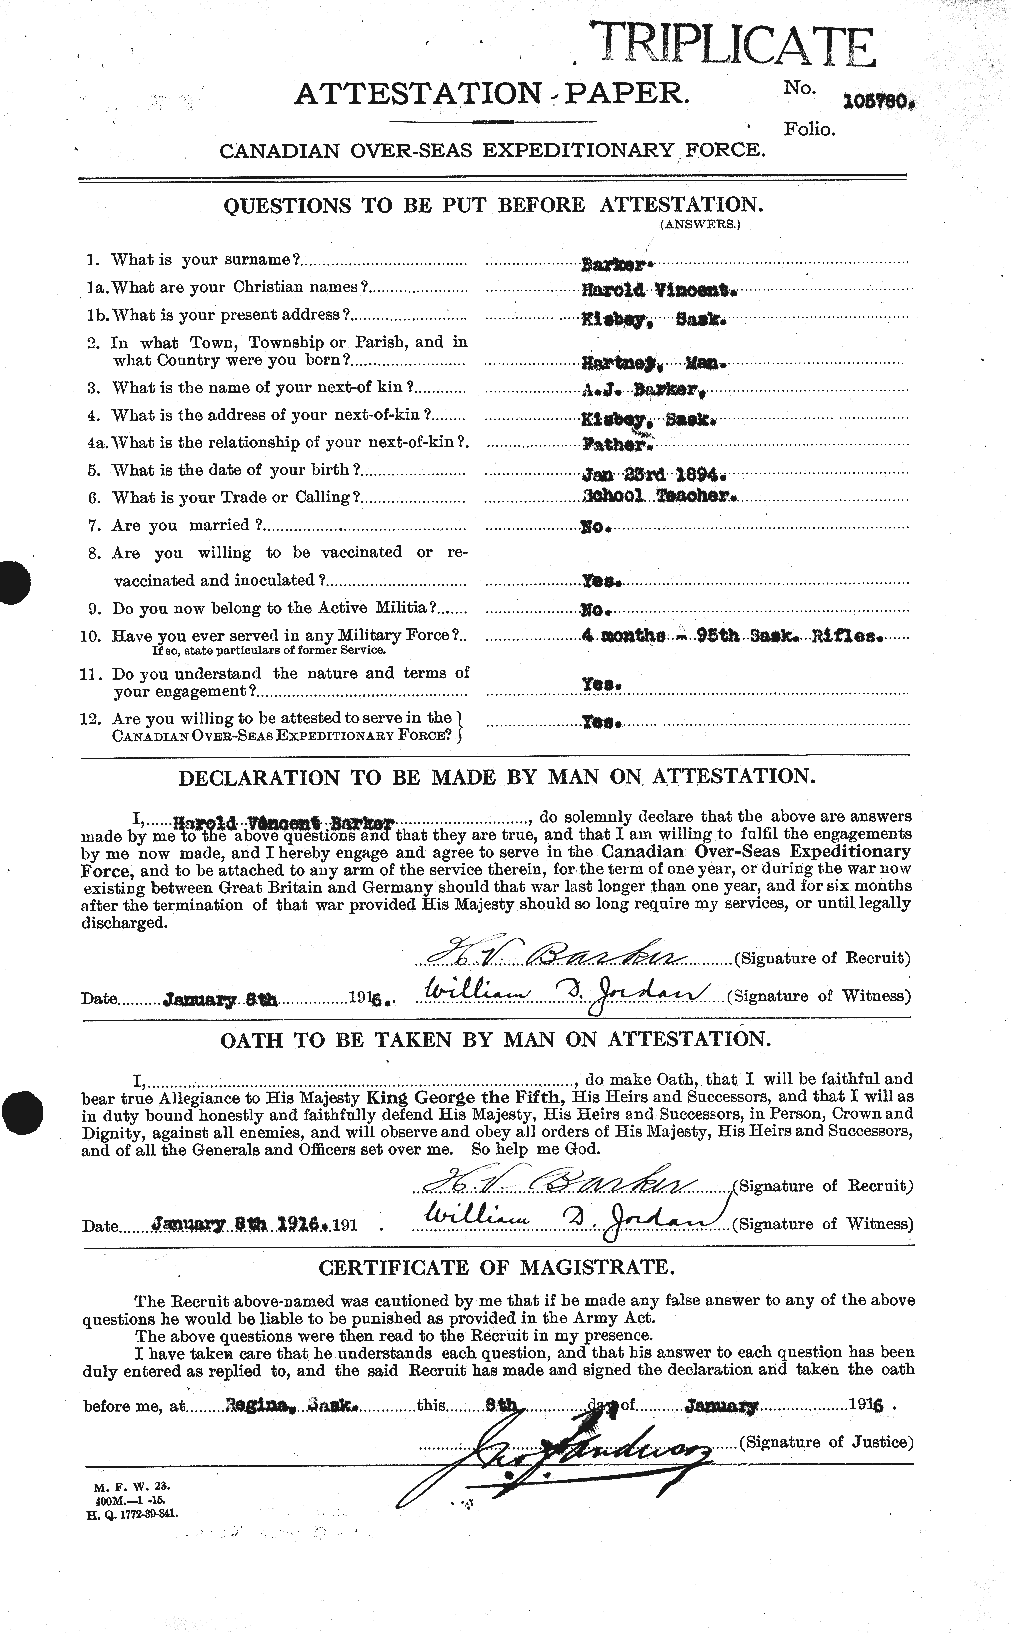 Personnel Records of the First World War - CEF 227521a